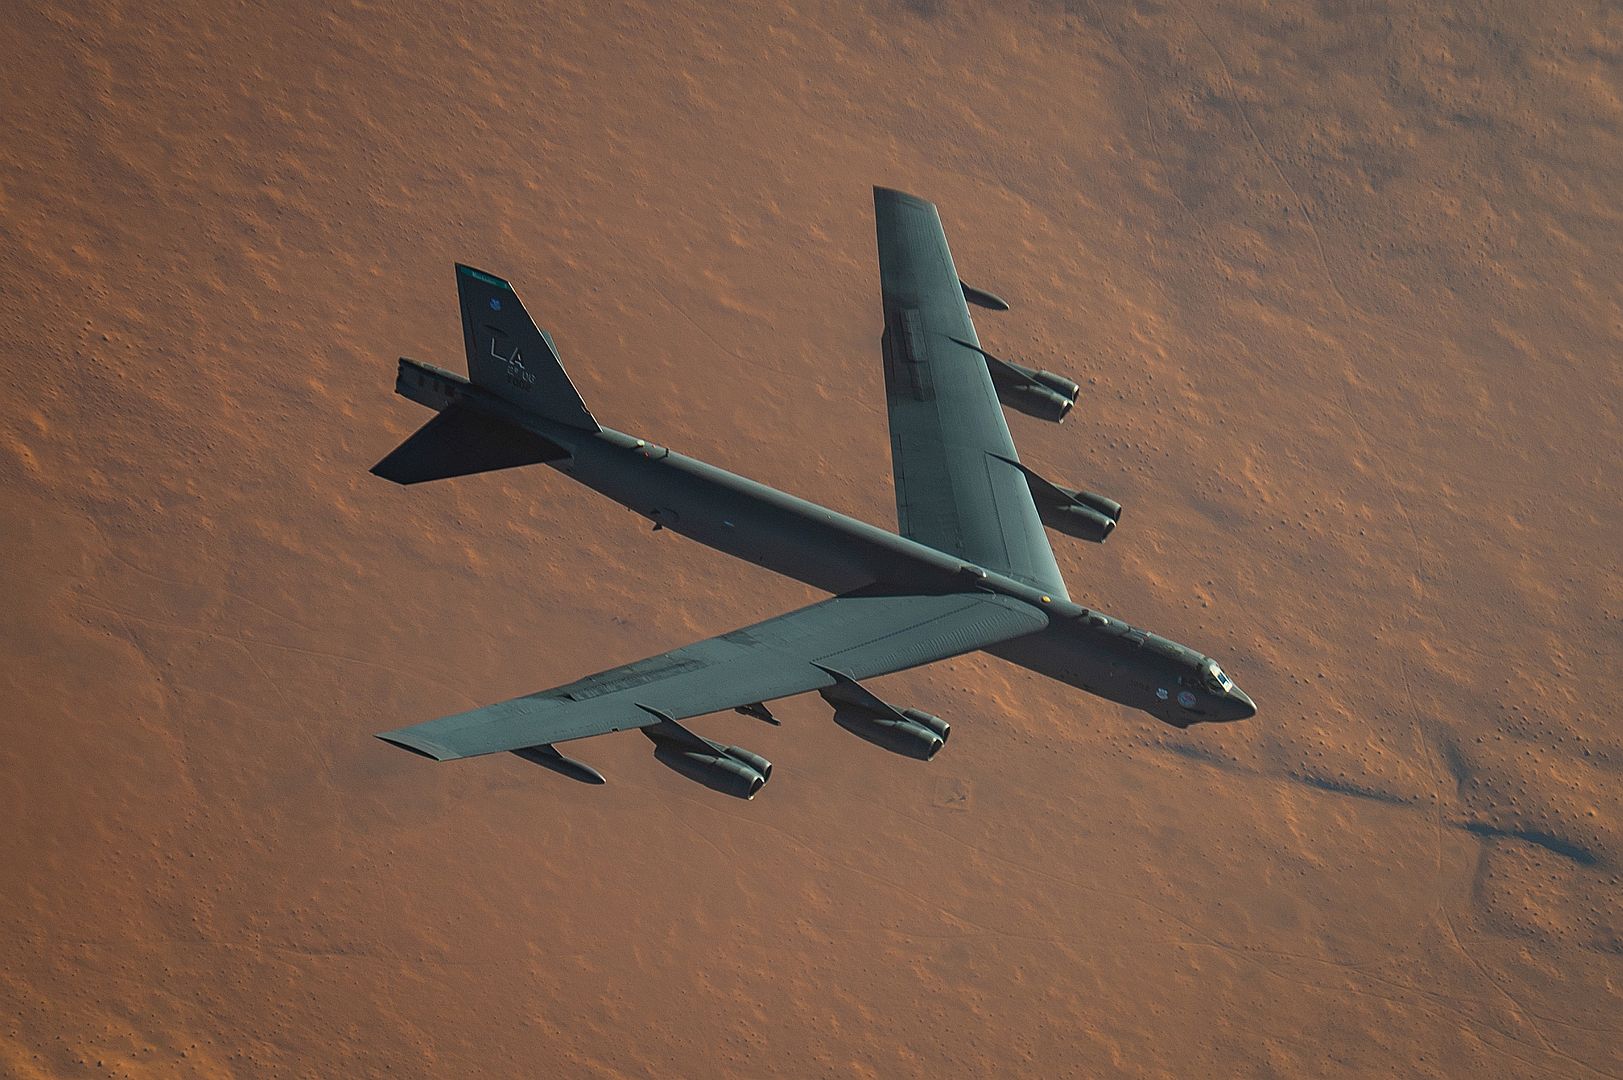 B 52 Stratofortress Assigned To The 2nd Bomb Wing Flies Over Southwest Asia During A Aerial Refueling Mission With KC 135 Stratotanker Aircraft Assigned To The 340th Expeditionary Air Refueling Squadron